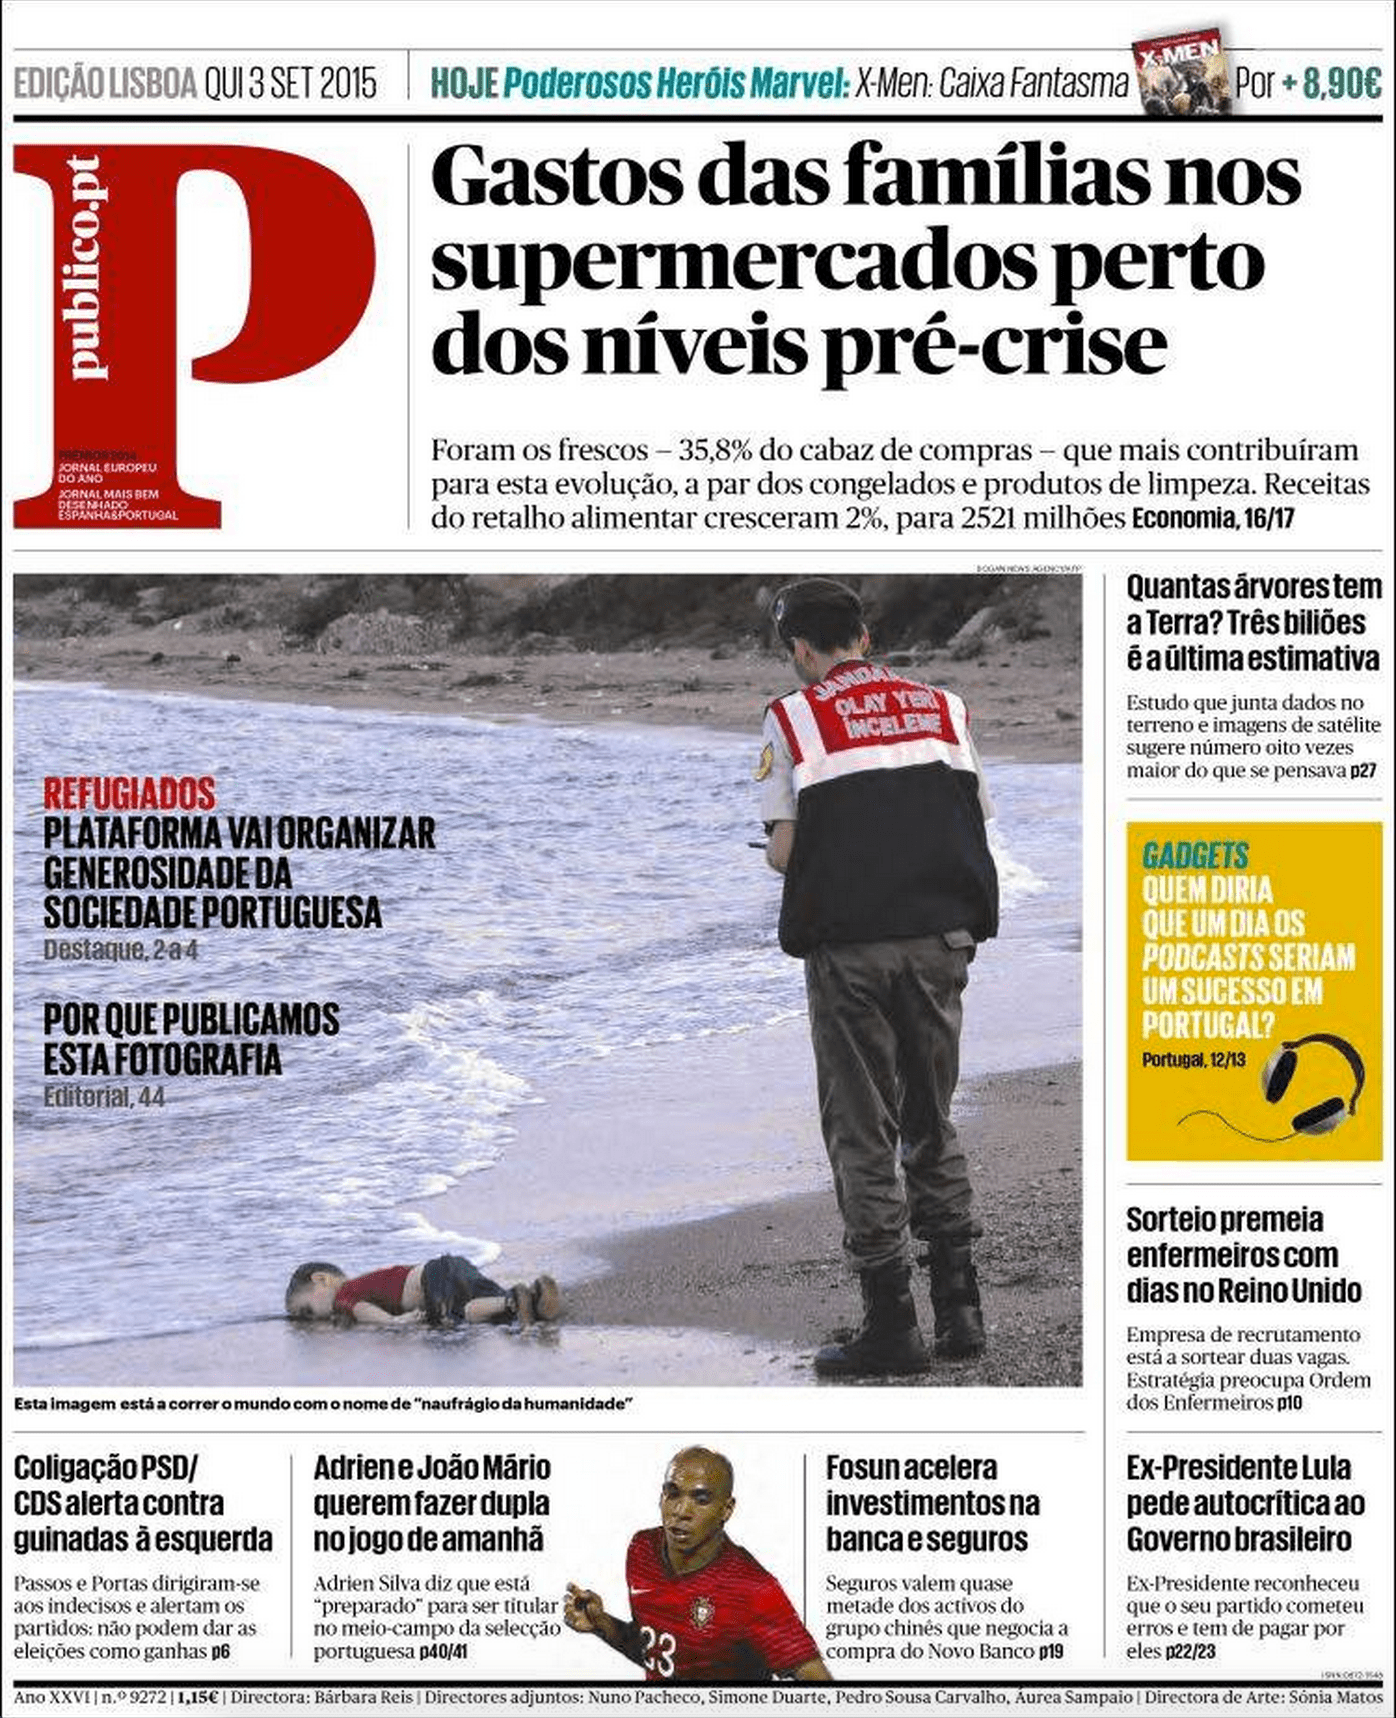 Drowned Migrant Boy Publico front page